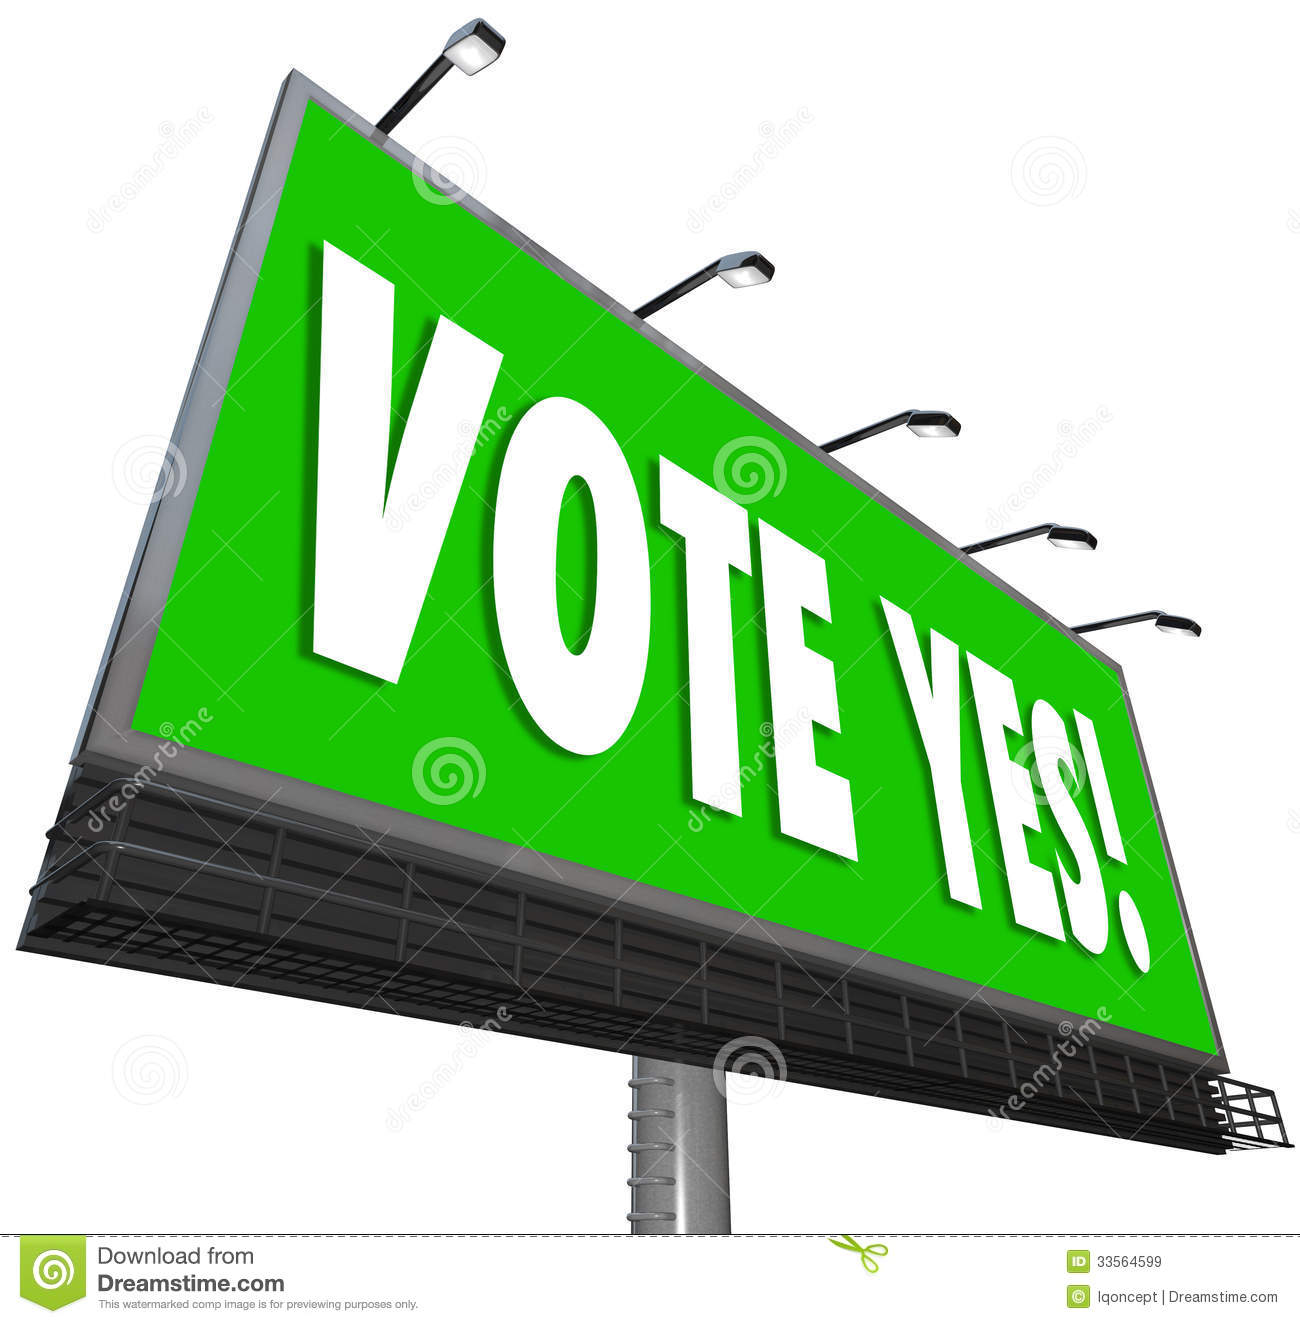 Vote Yes Words On A Big Green Outdoor Billboard To Encourage You